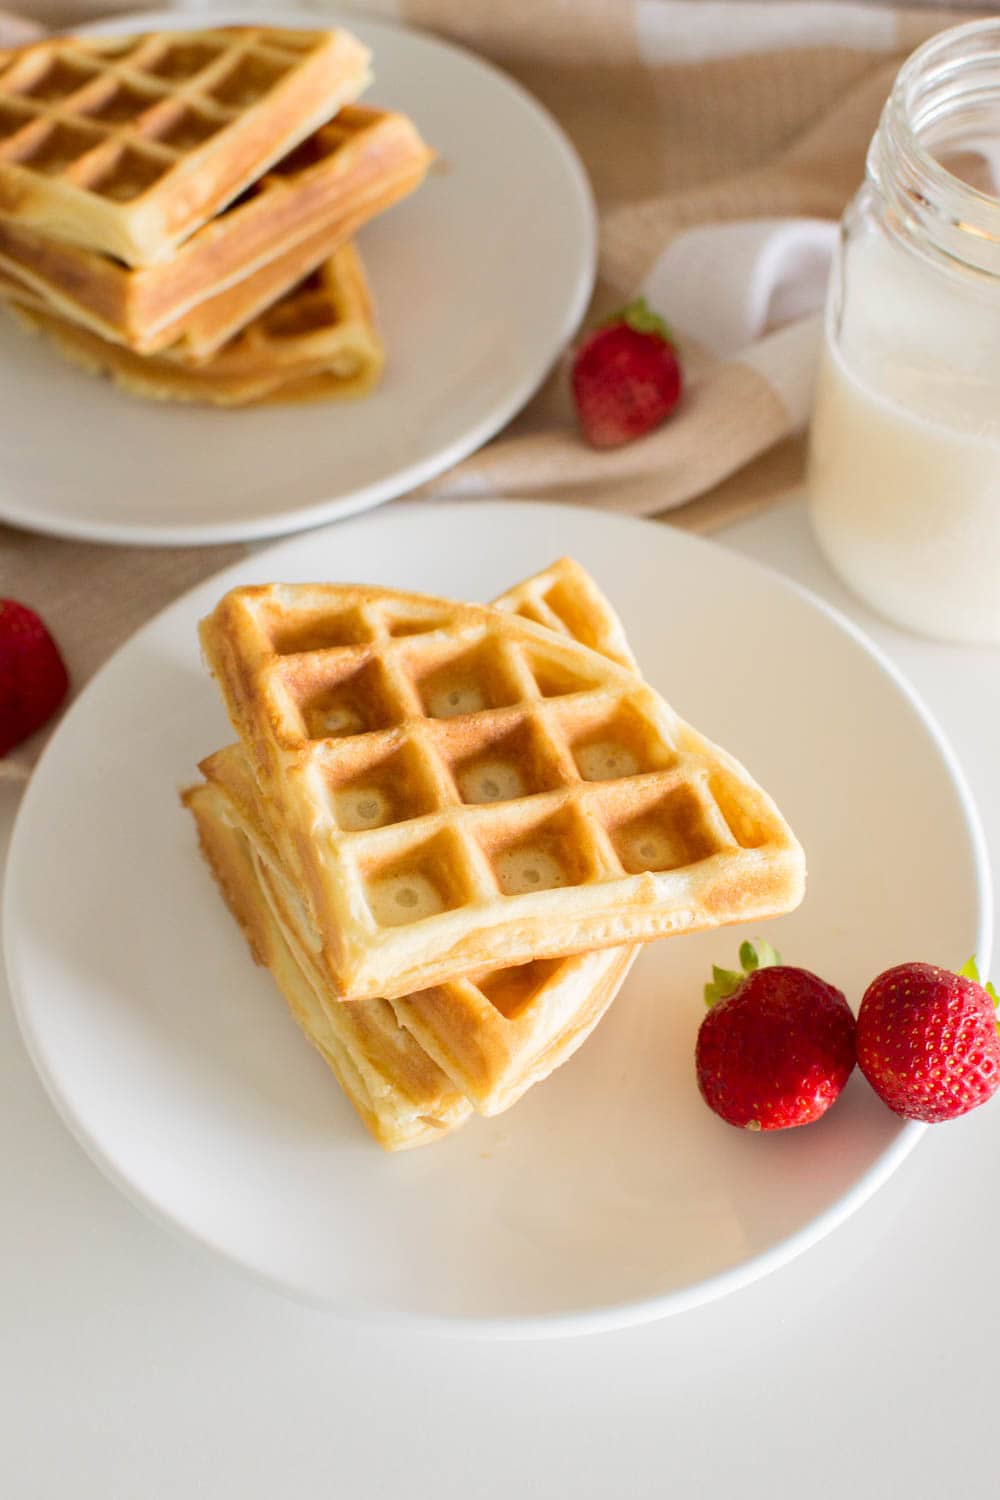 Easy homemade waffles cut into quarters and piled on top of one another being served on a white plate with fruit on the side